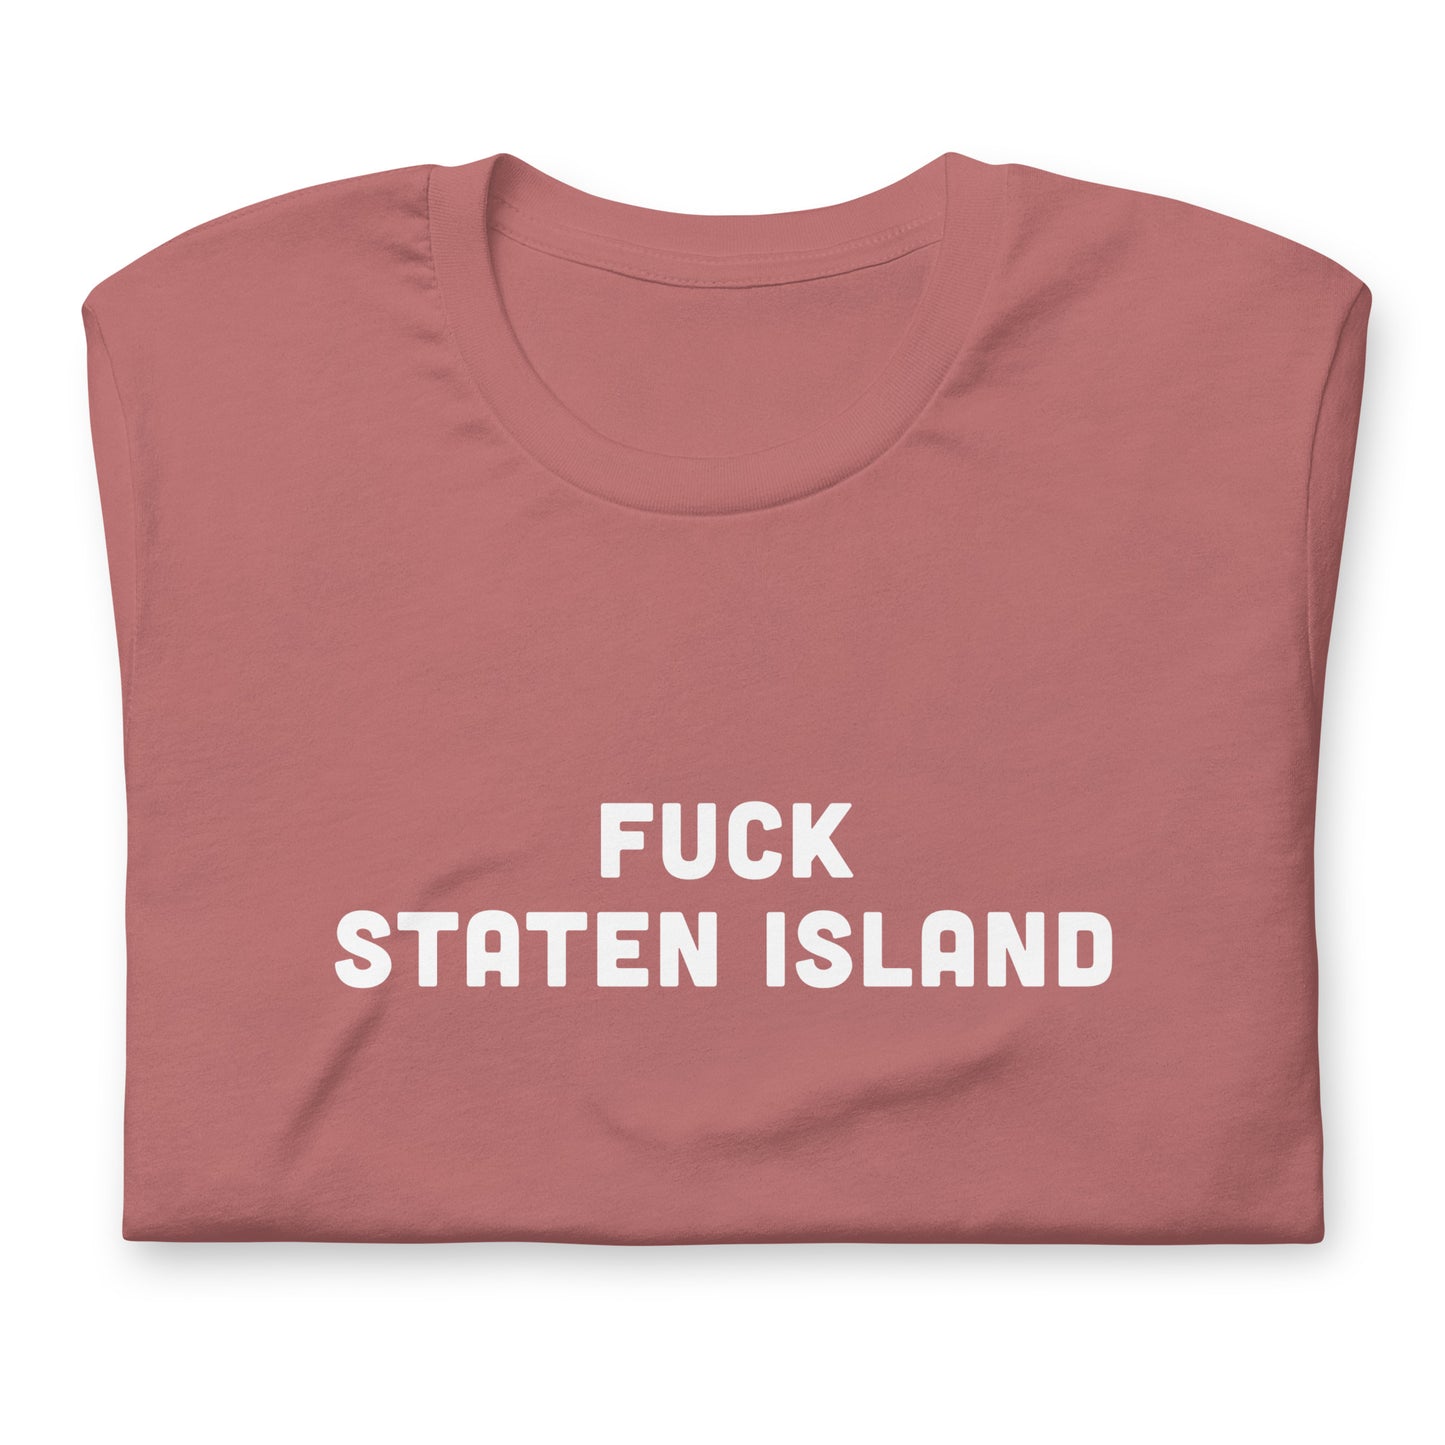 Fuck Staten Island T-Shirt Size S Color Black